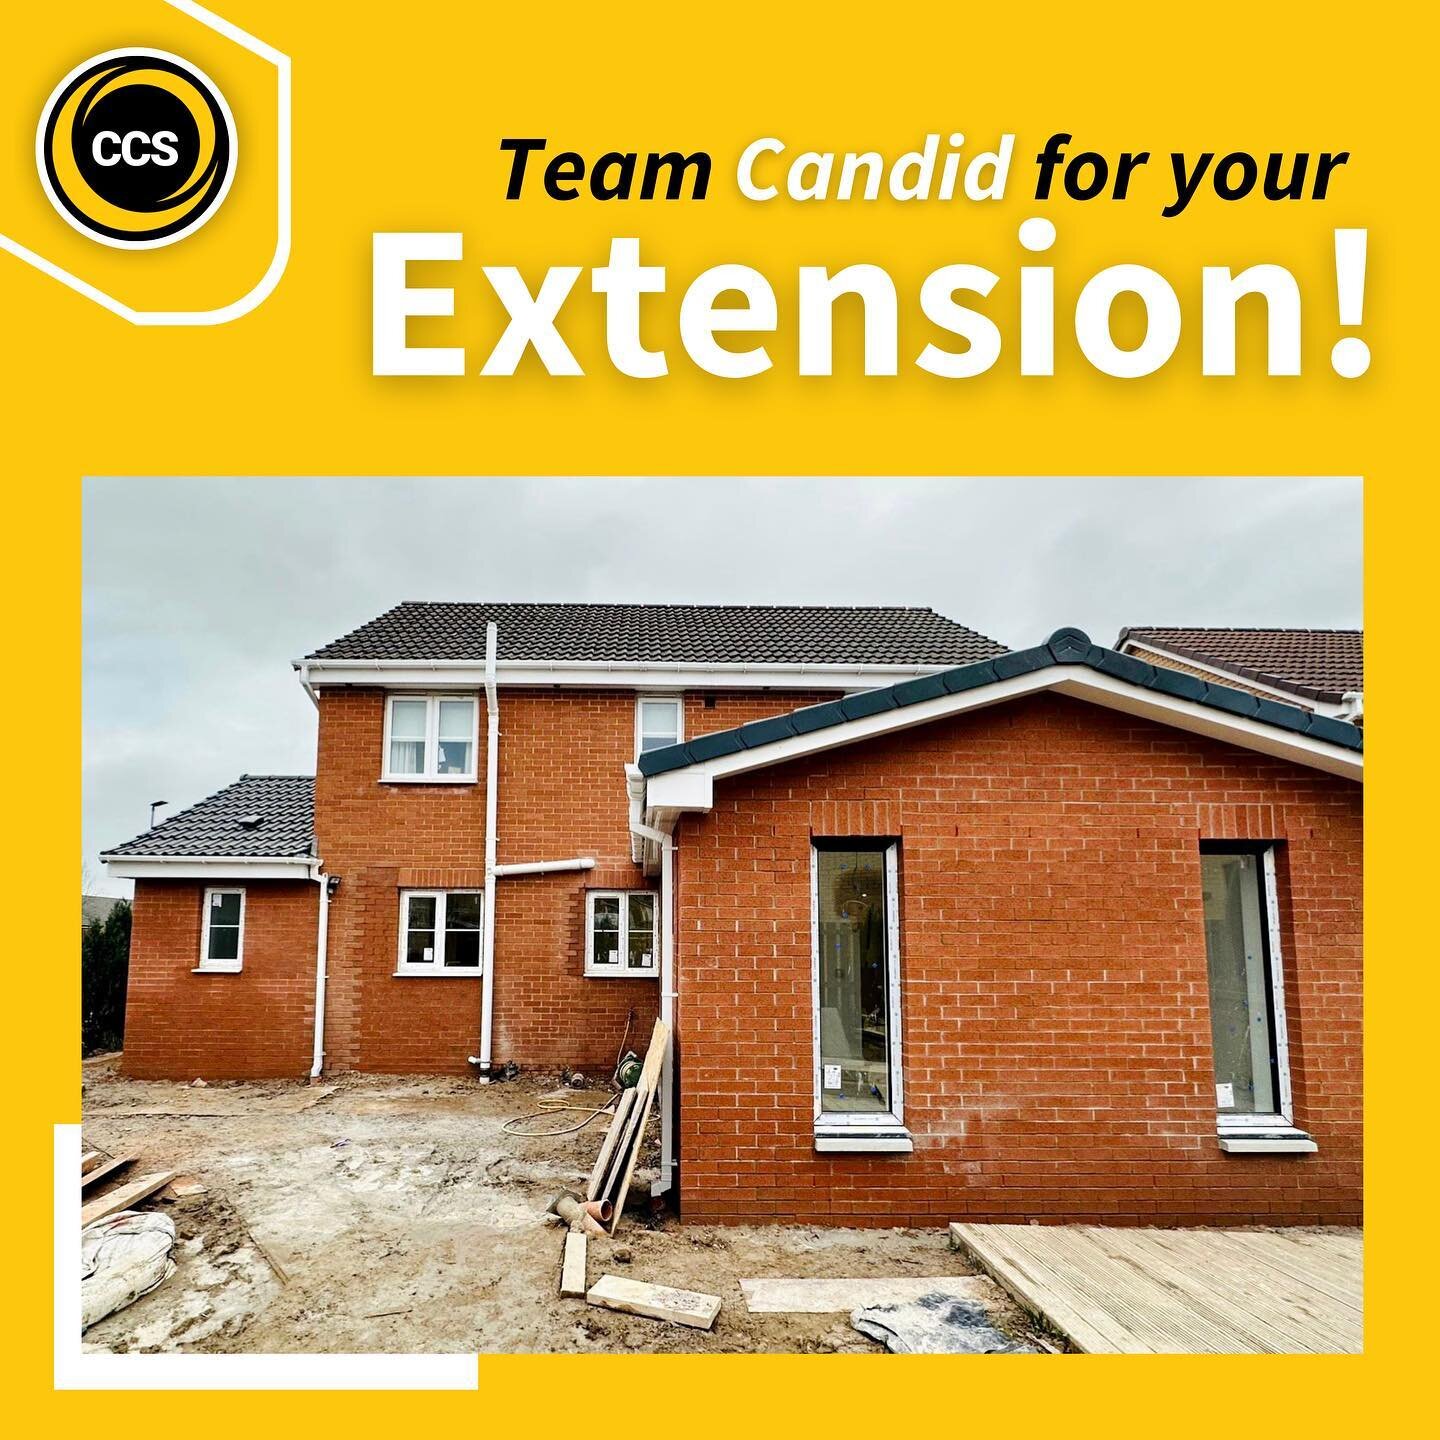 Extend your home this summer with Candid Construction Scotland! 🏡🛠 

Did you know.. this time of year is the most efficient for extending your home? Fair weather presents us with great conditions for construction. This means you can enjoy your new 